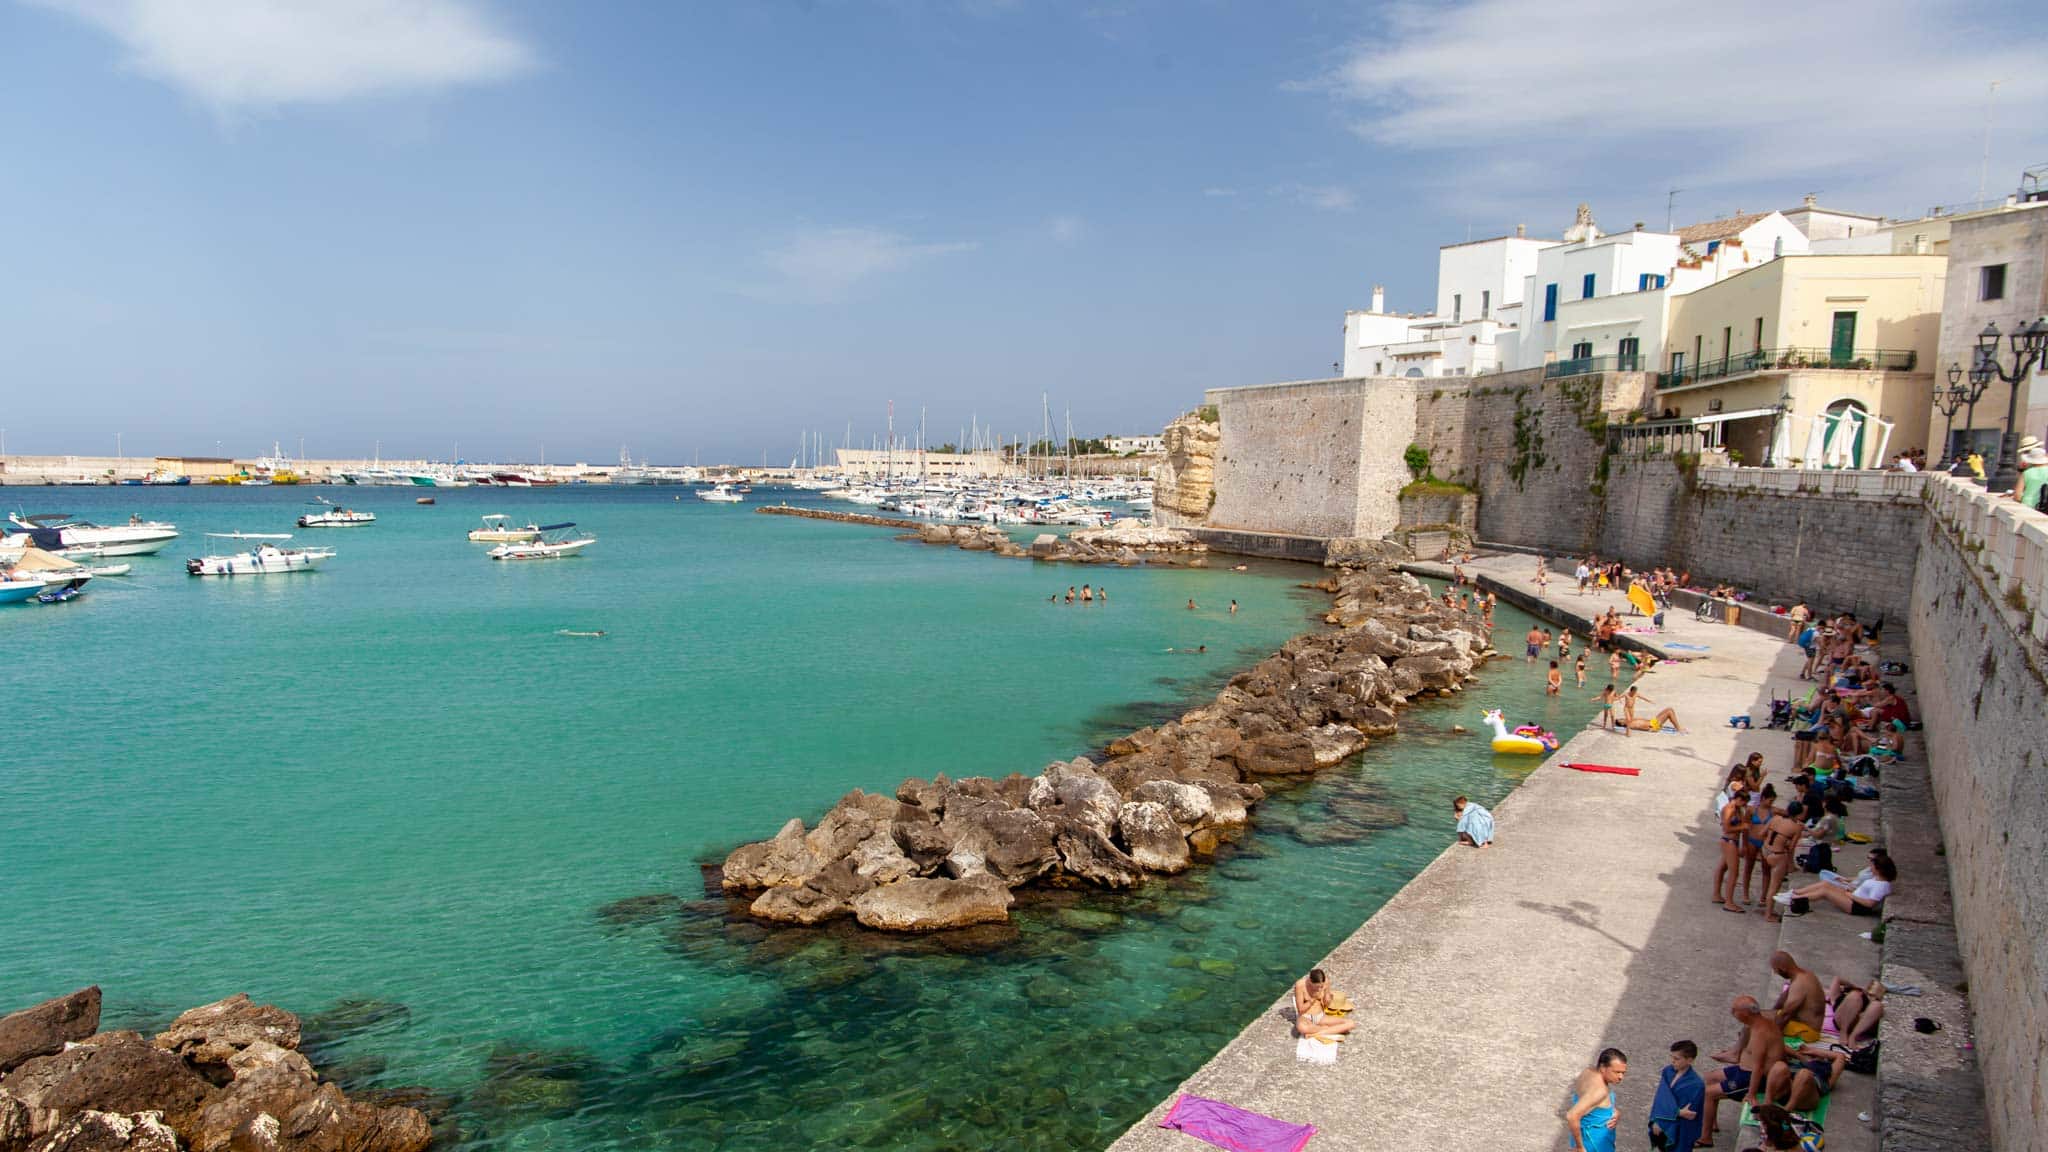 The walled city of Otranto in Puglia with the coast outside the walls